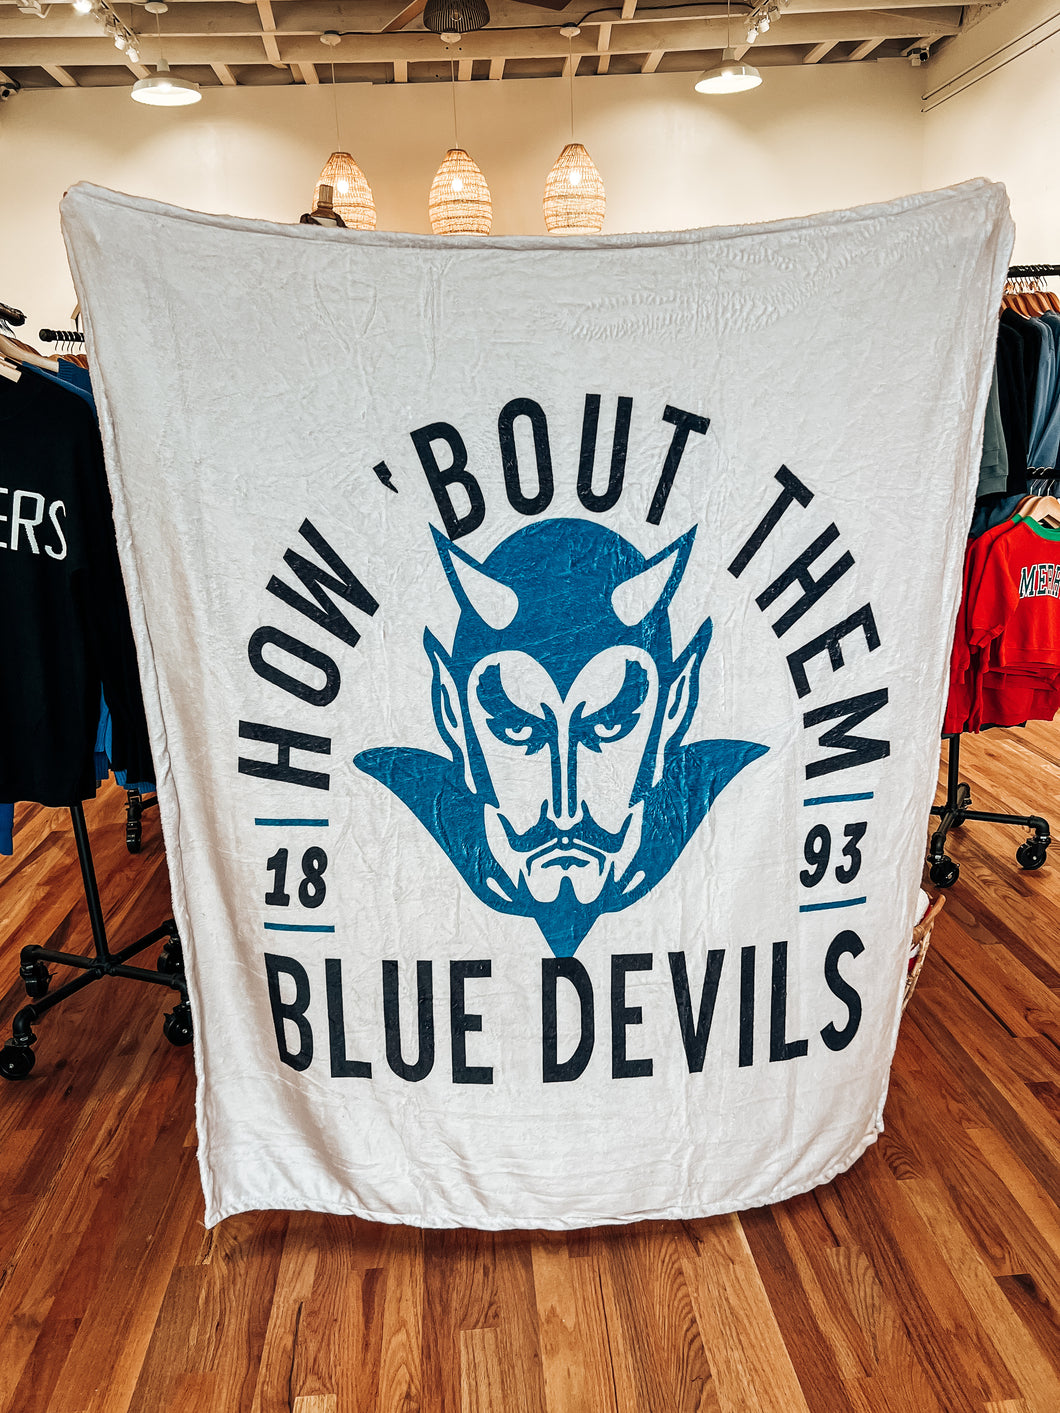 HOW BOUT THEM DEVILS blanket